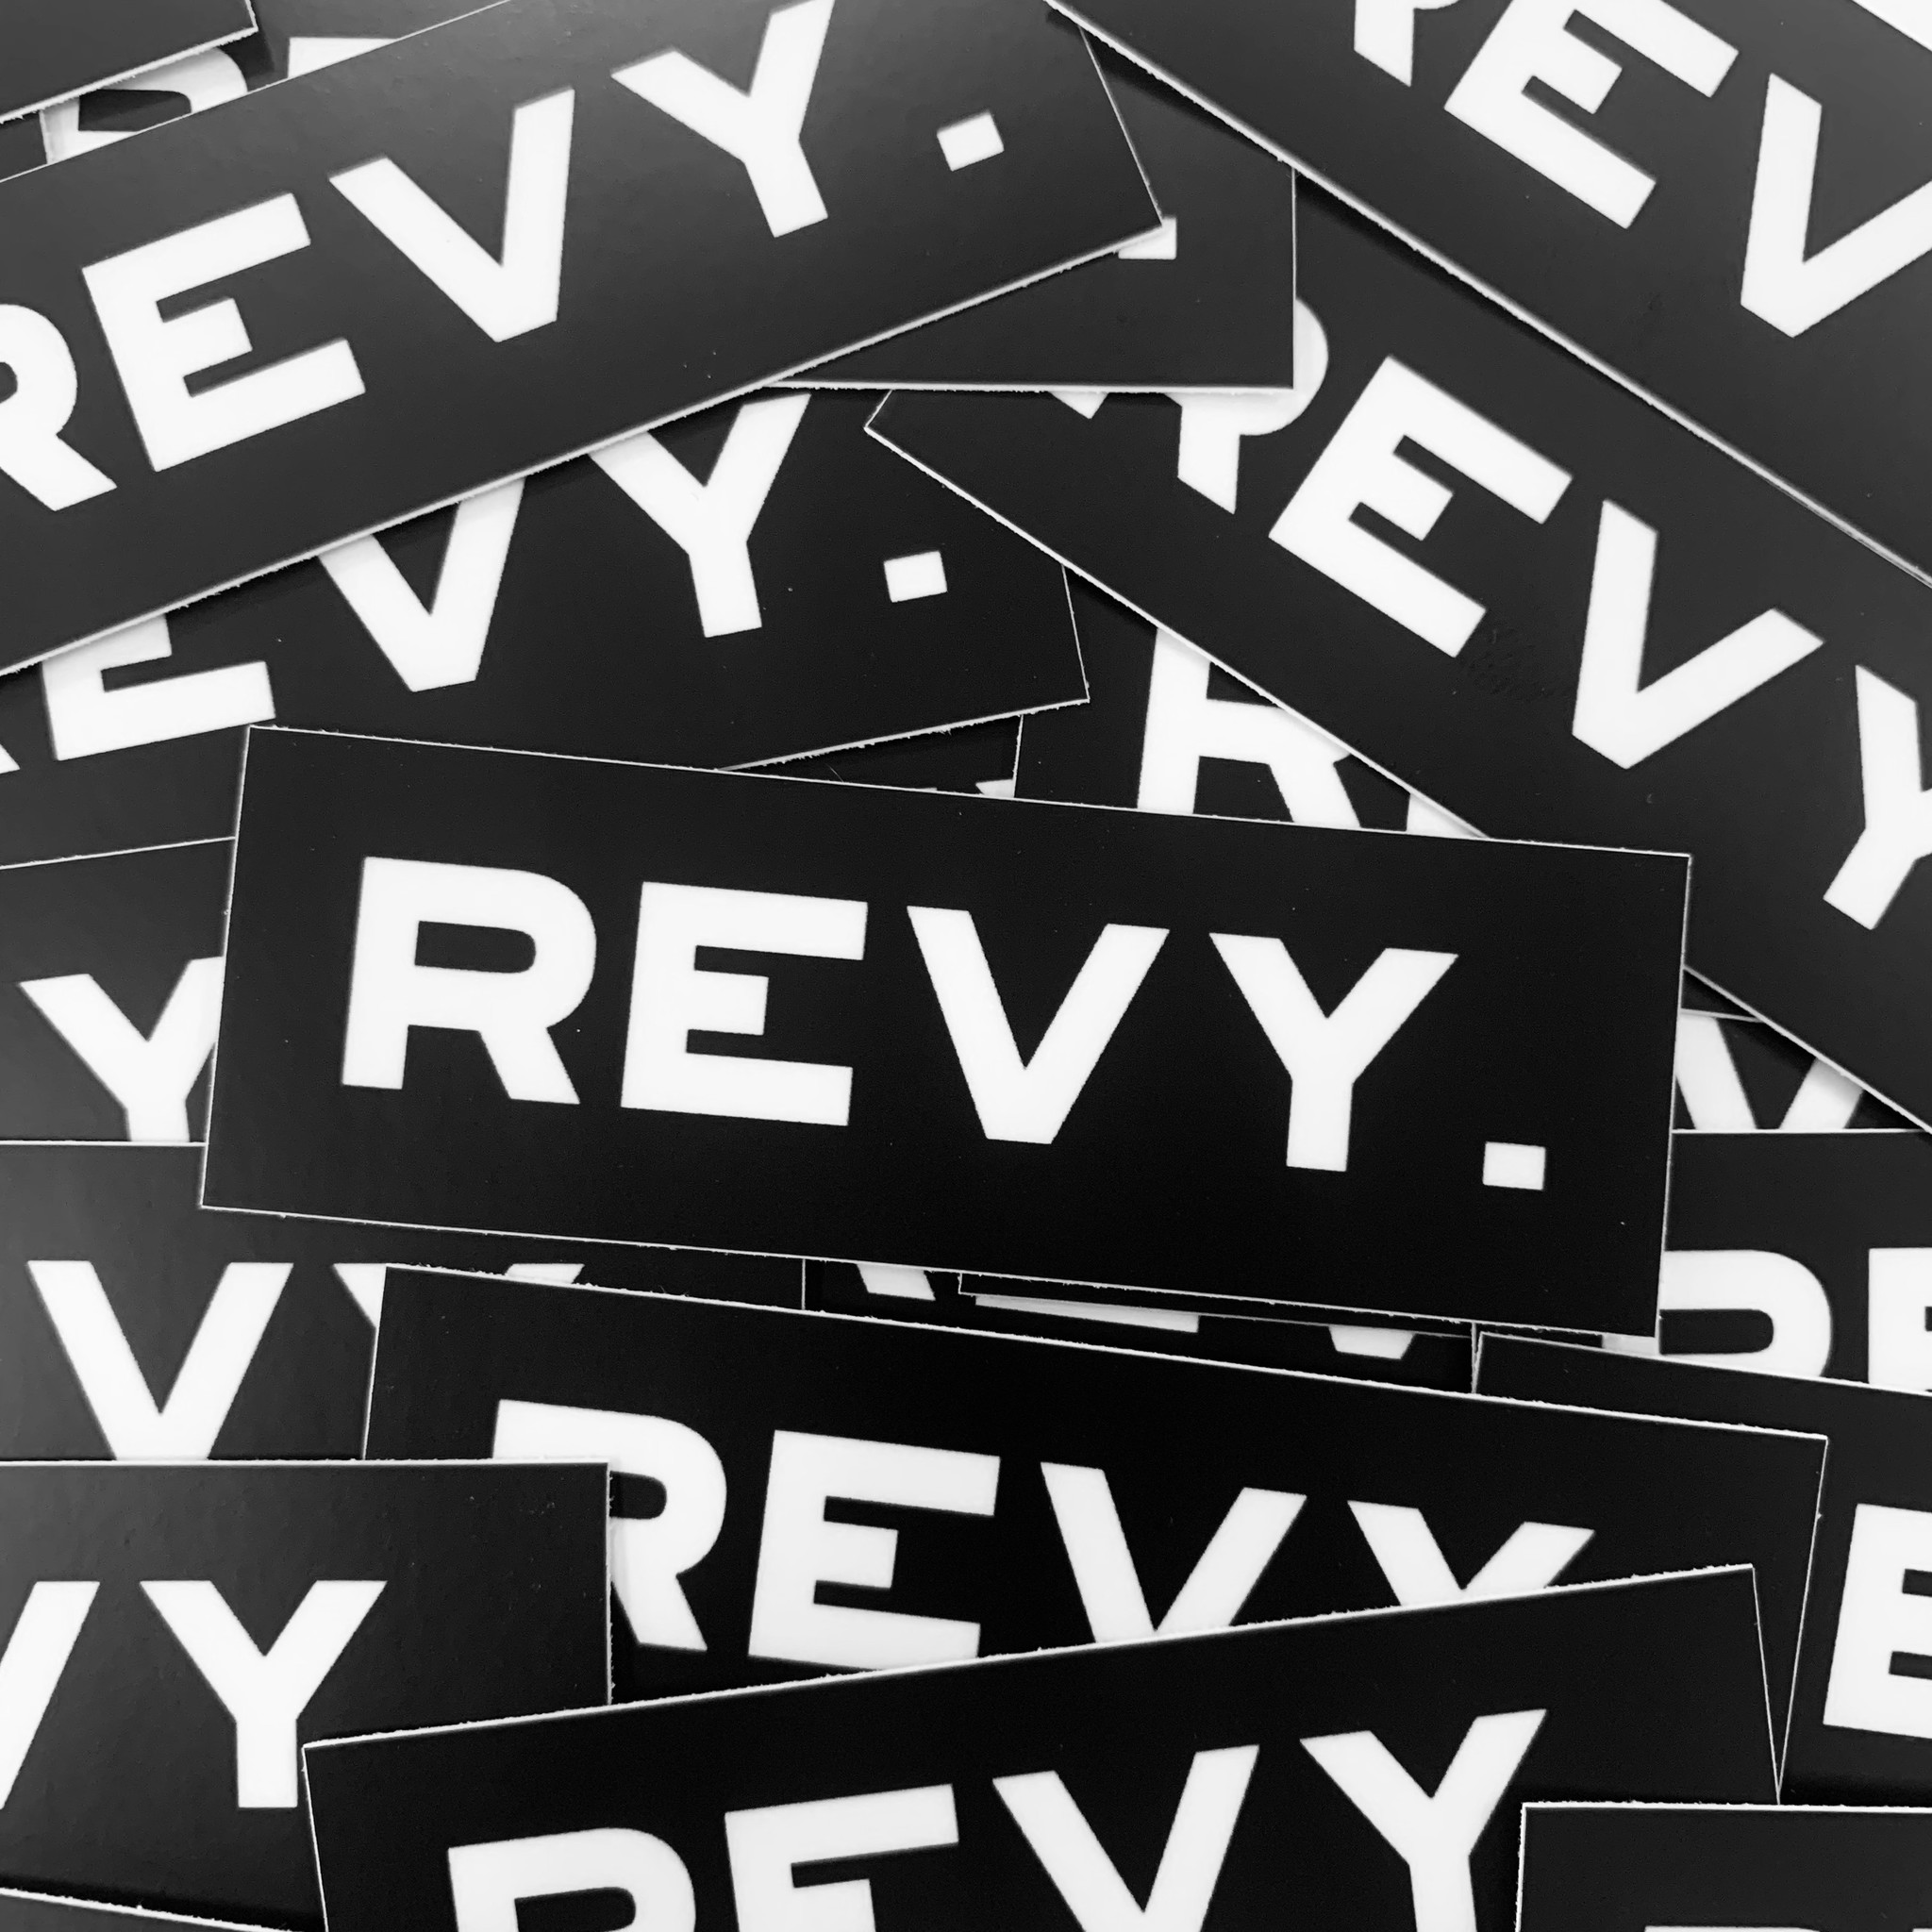 Trading Co. The REVY. Sticker